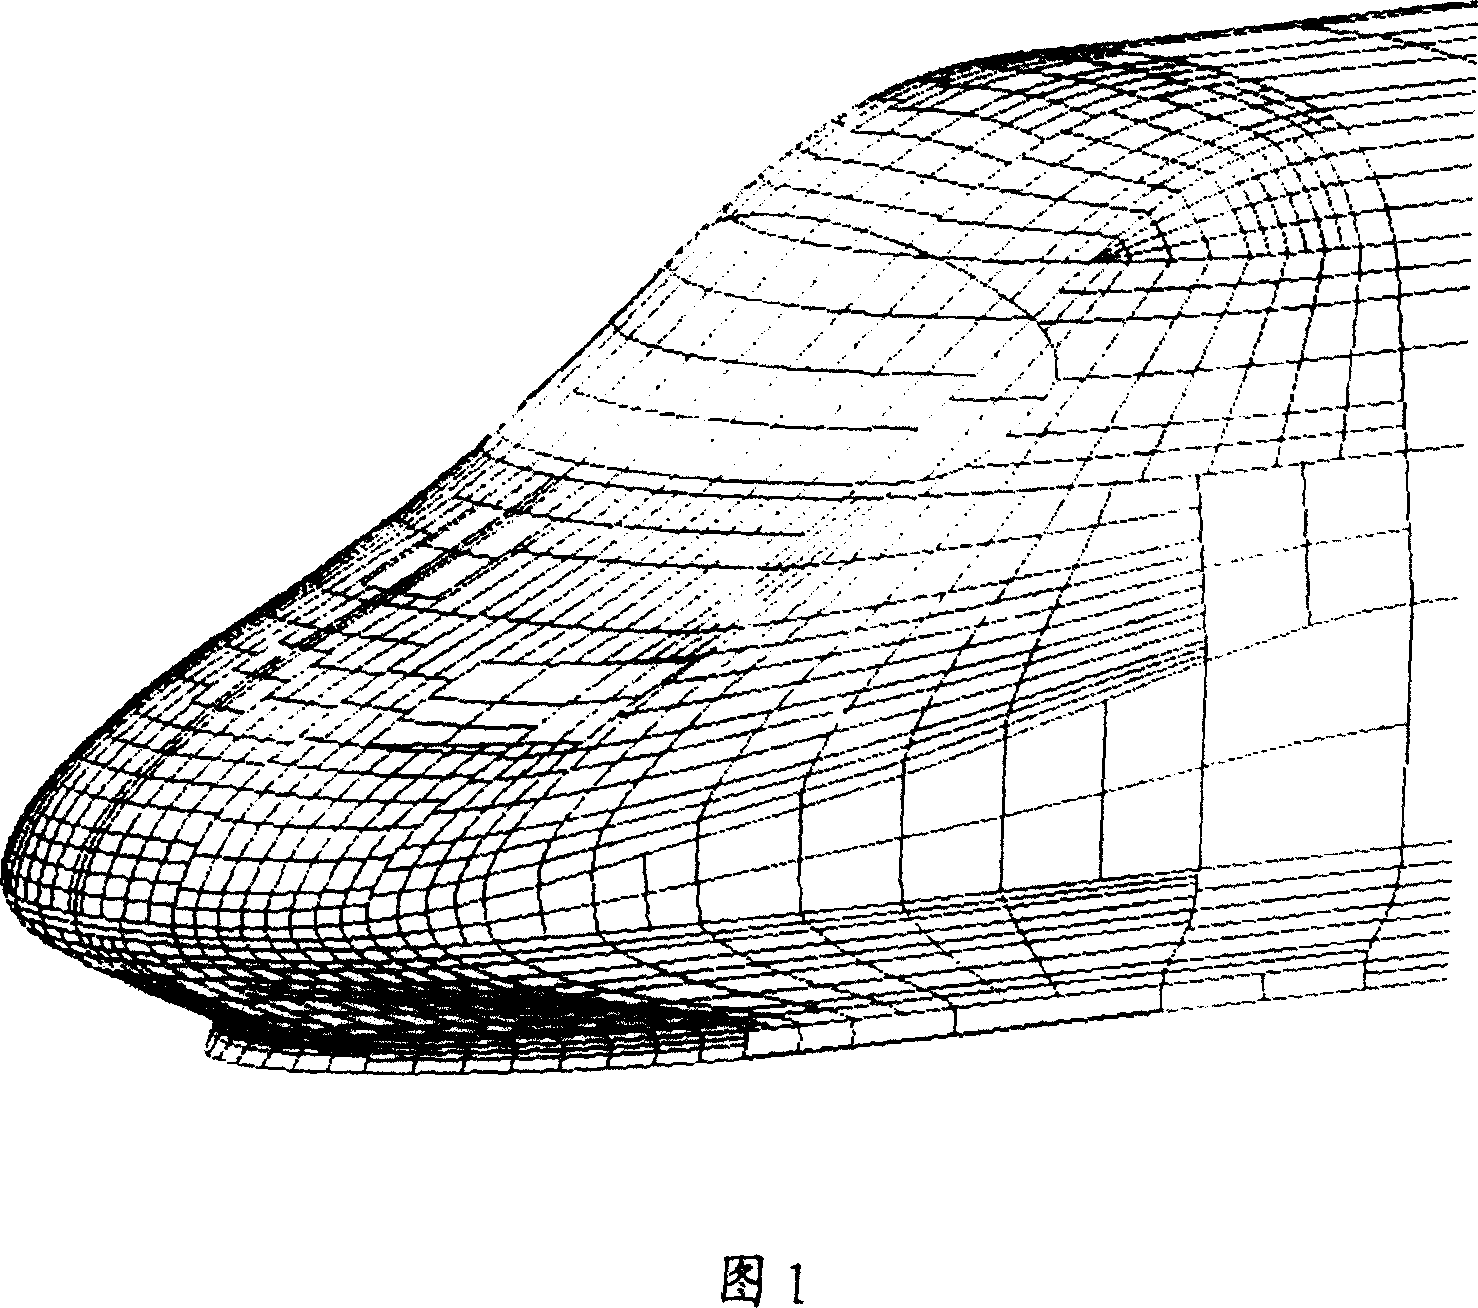 Design and process method for profile and structure of streamline locomotive